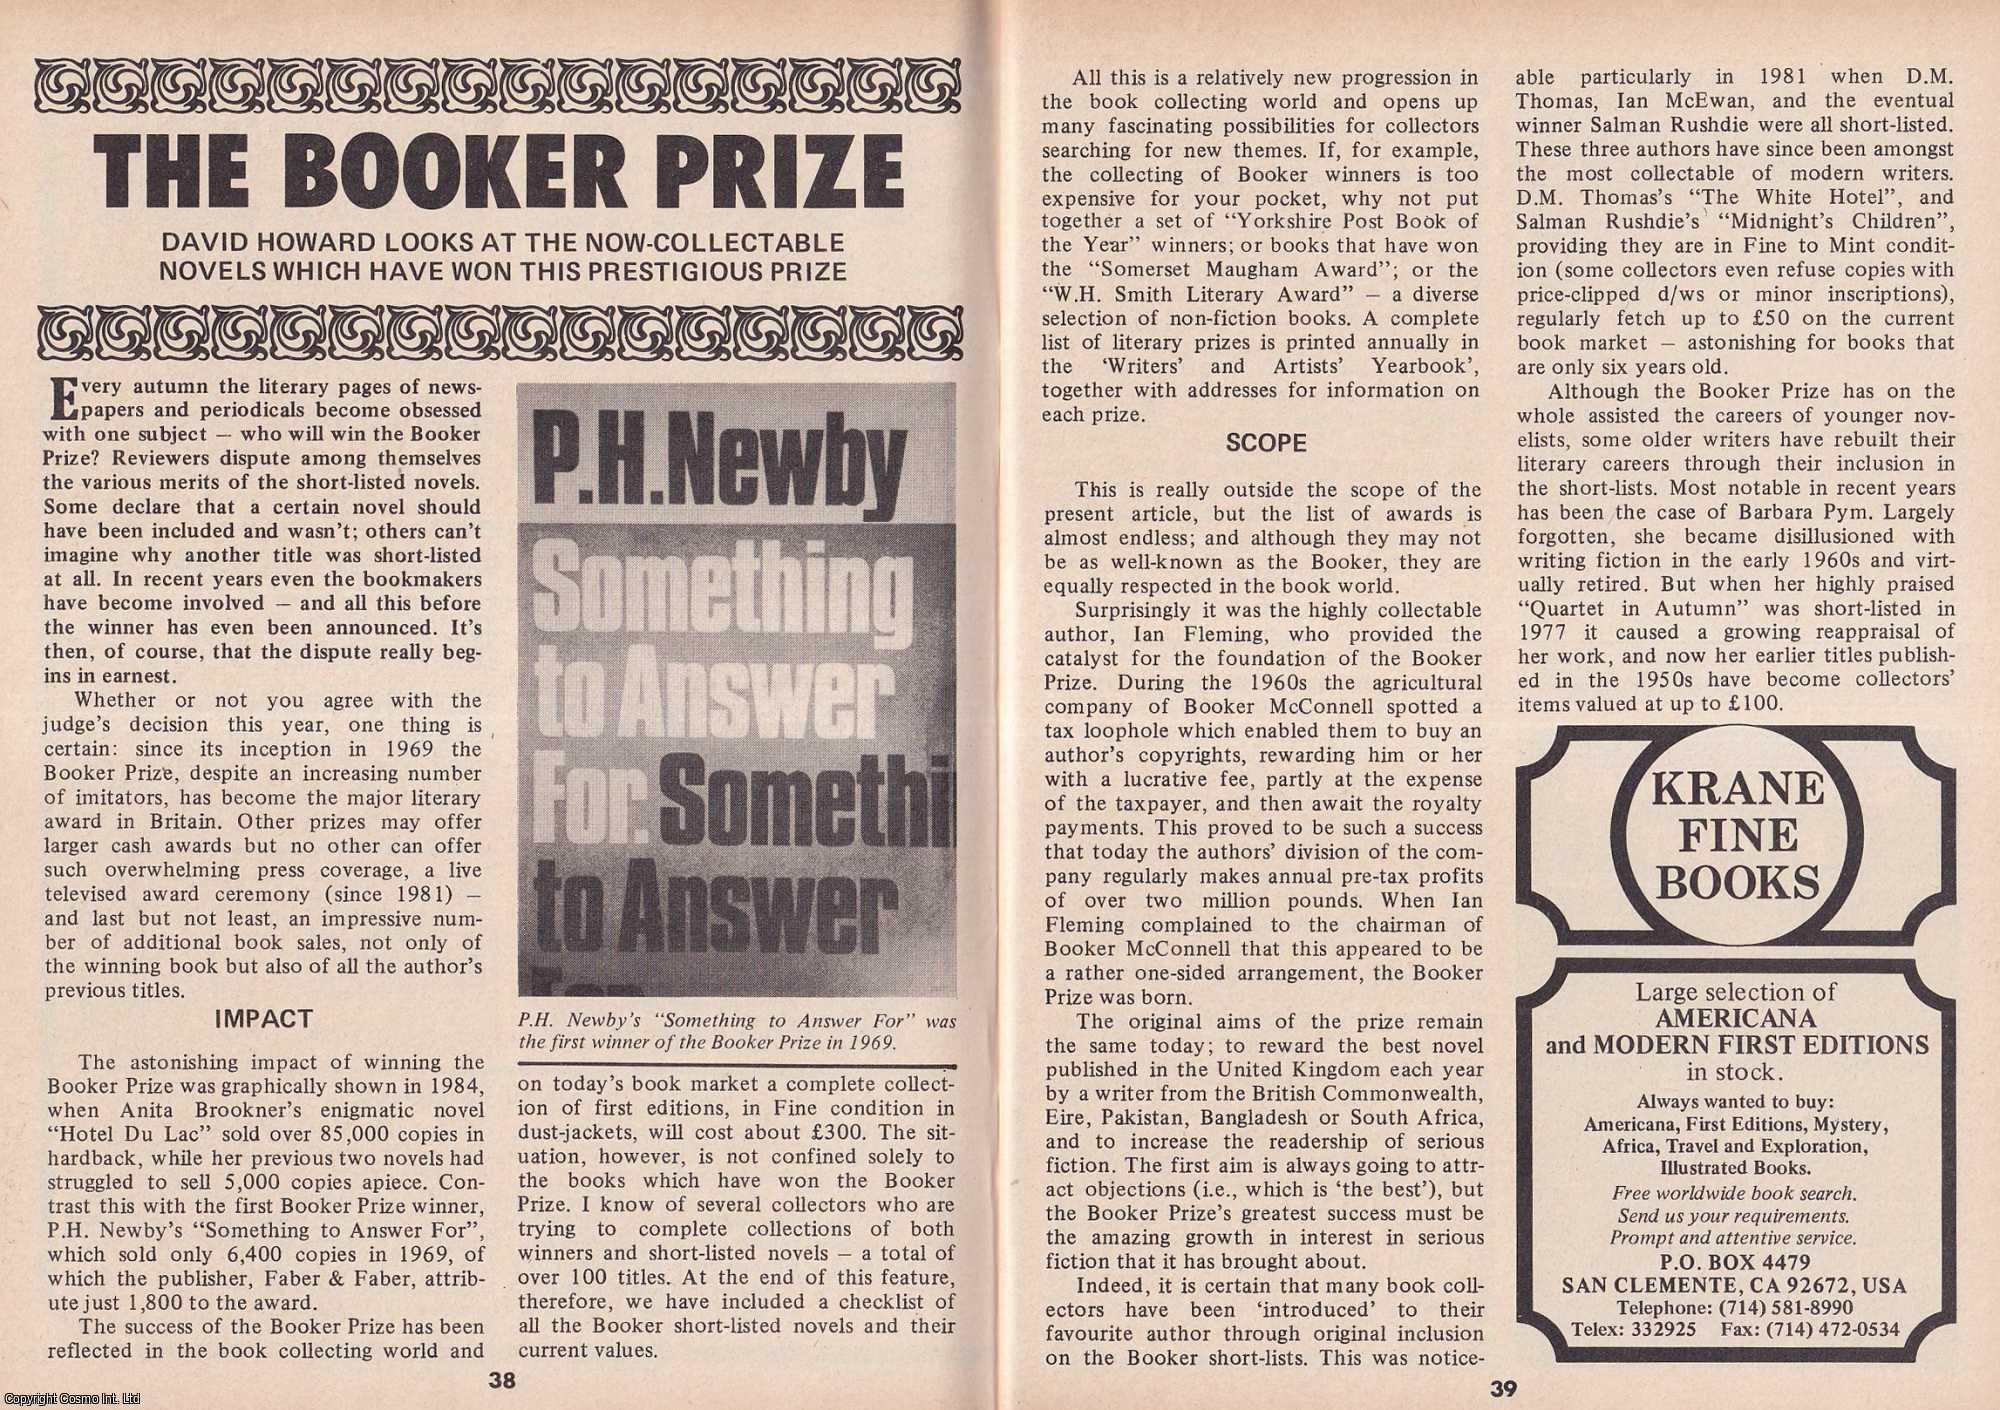 David Howard - The Booker Prize. The Collectable Novels which have Won this Prestigious Prize. This is an original article separated from an issue of The Book & Magazine Collector publication.